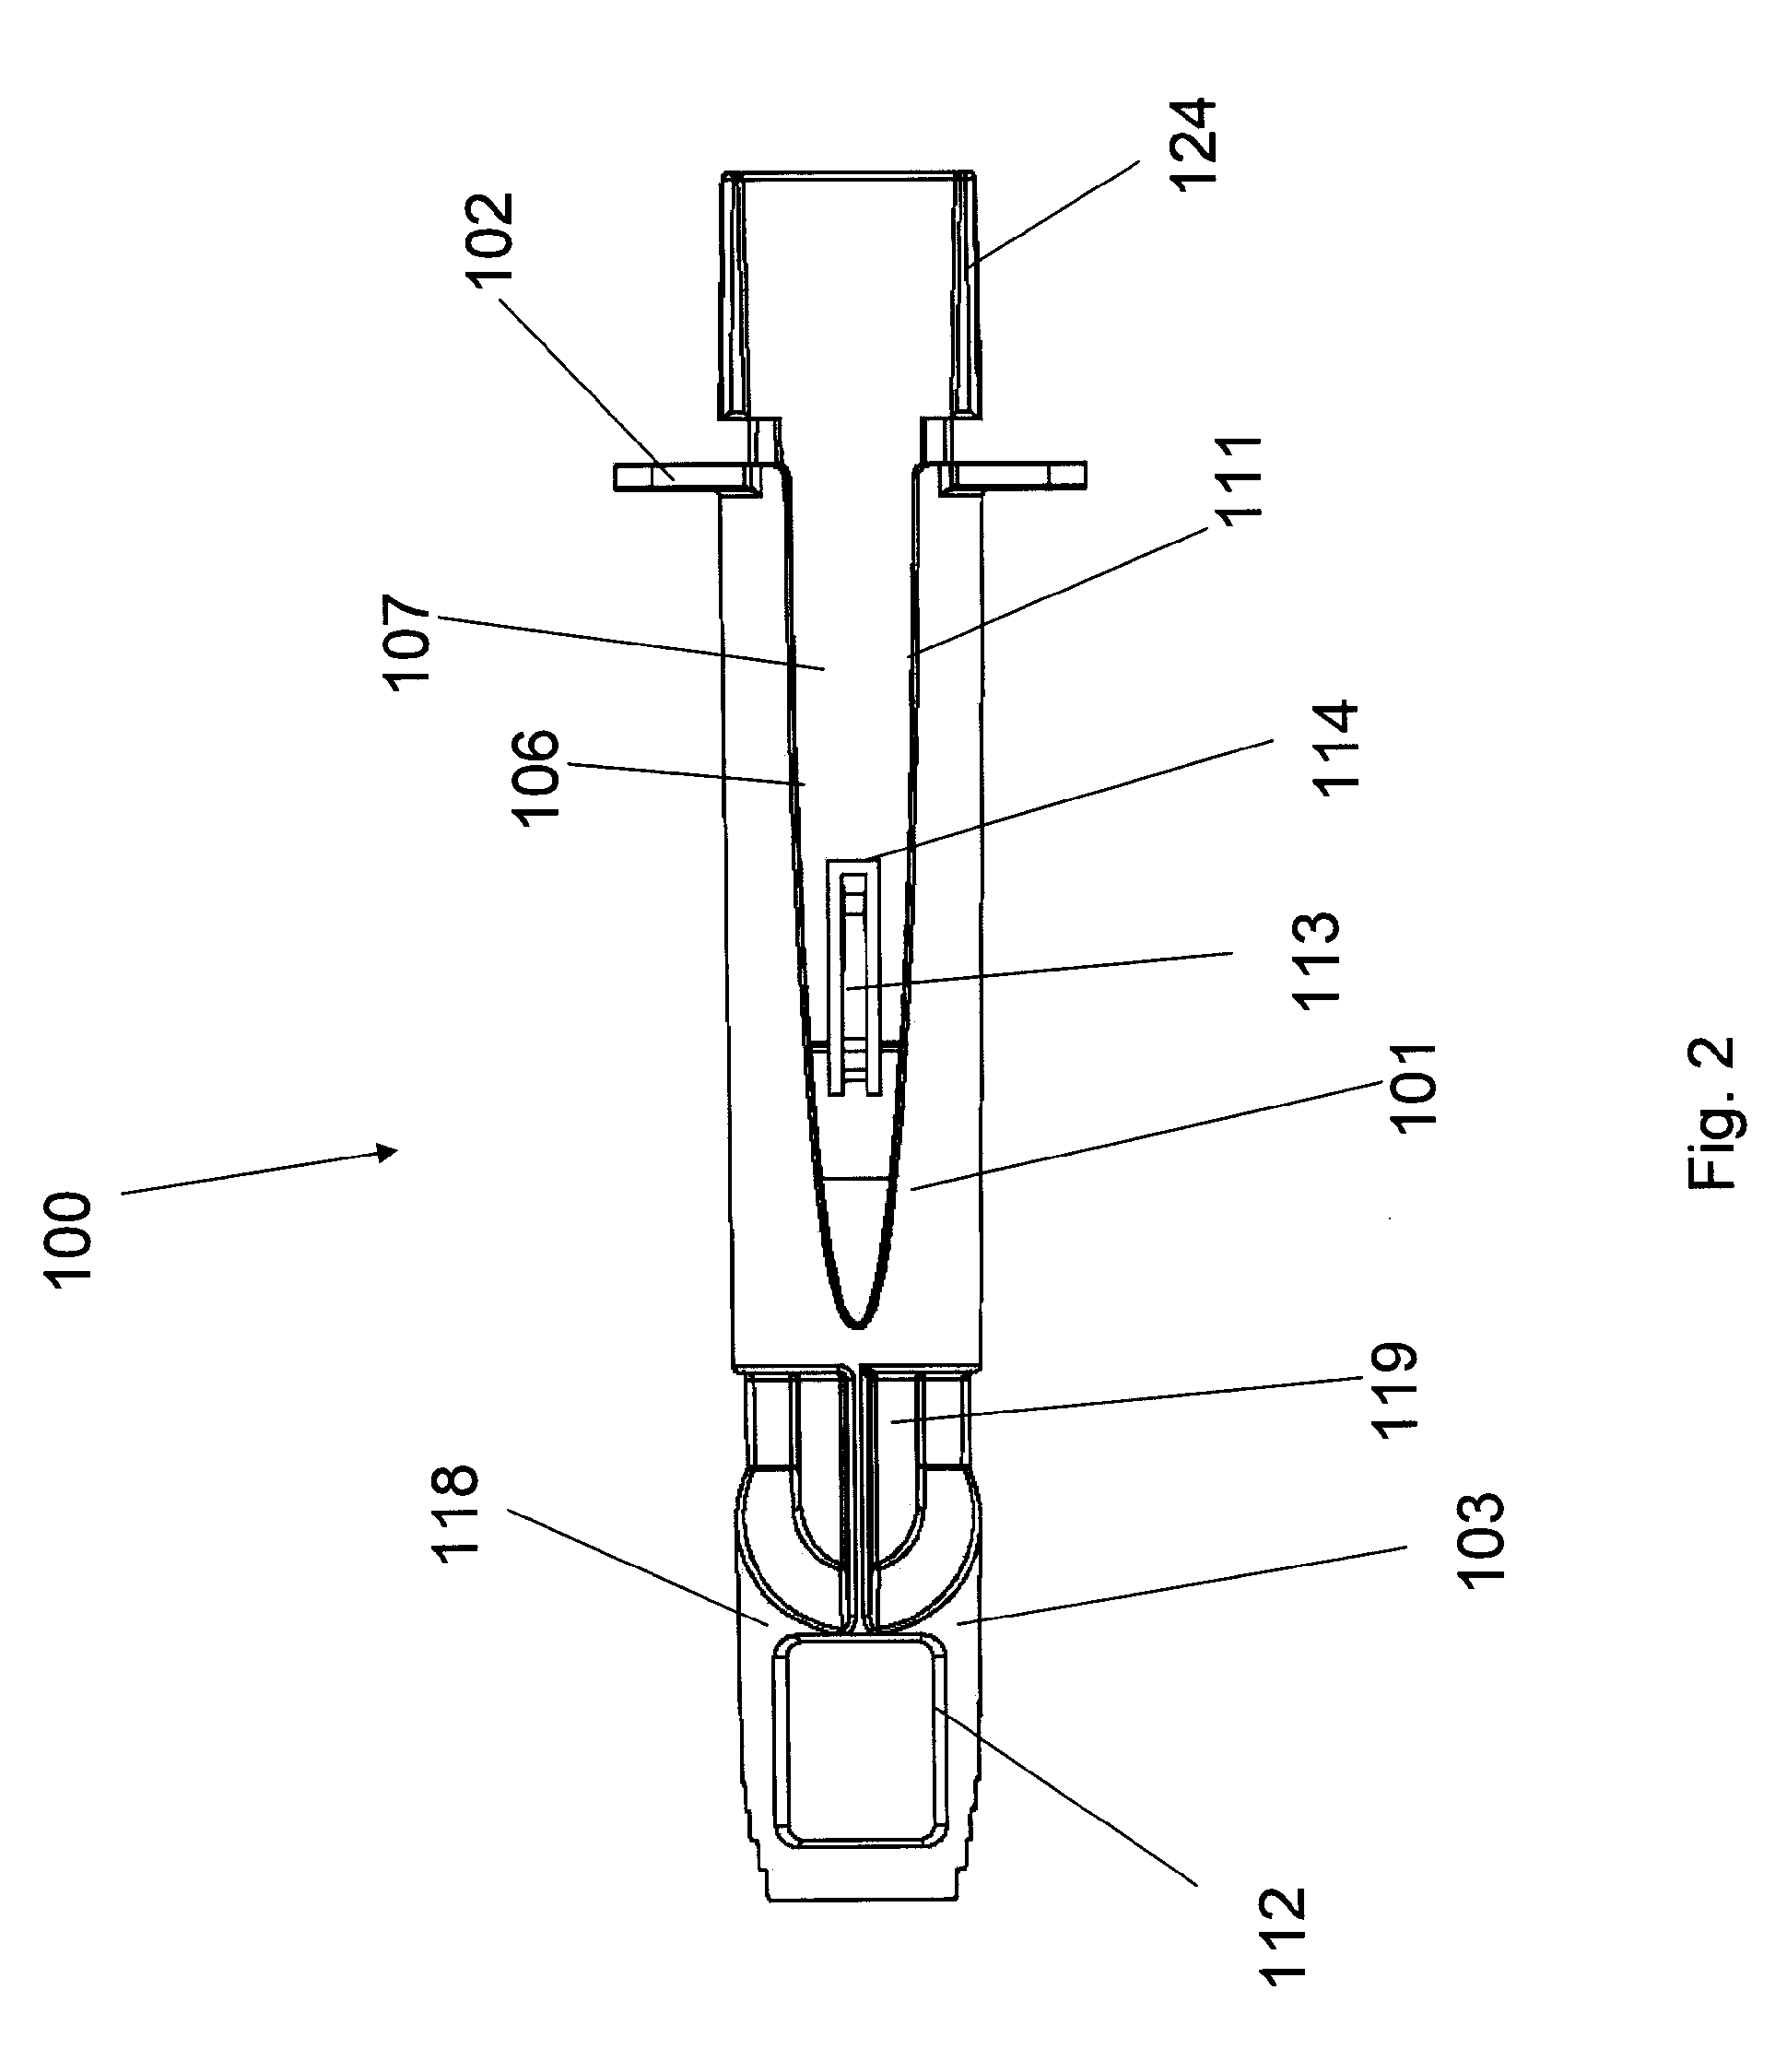 Methods and devices for intradermal injection